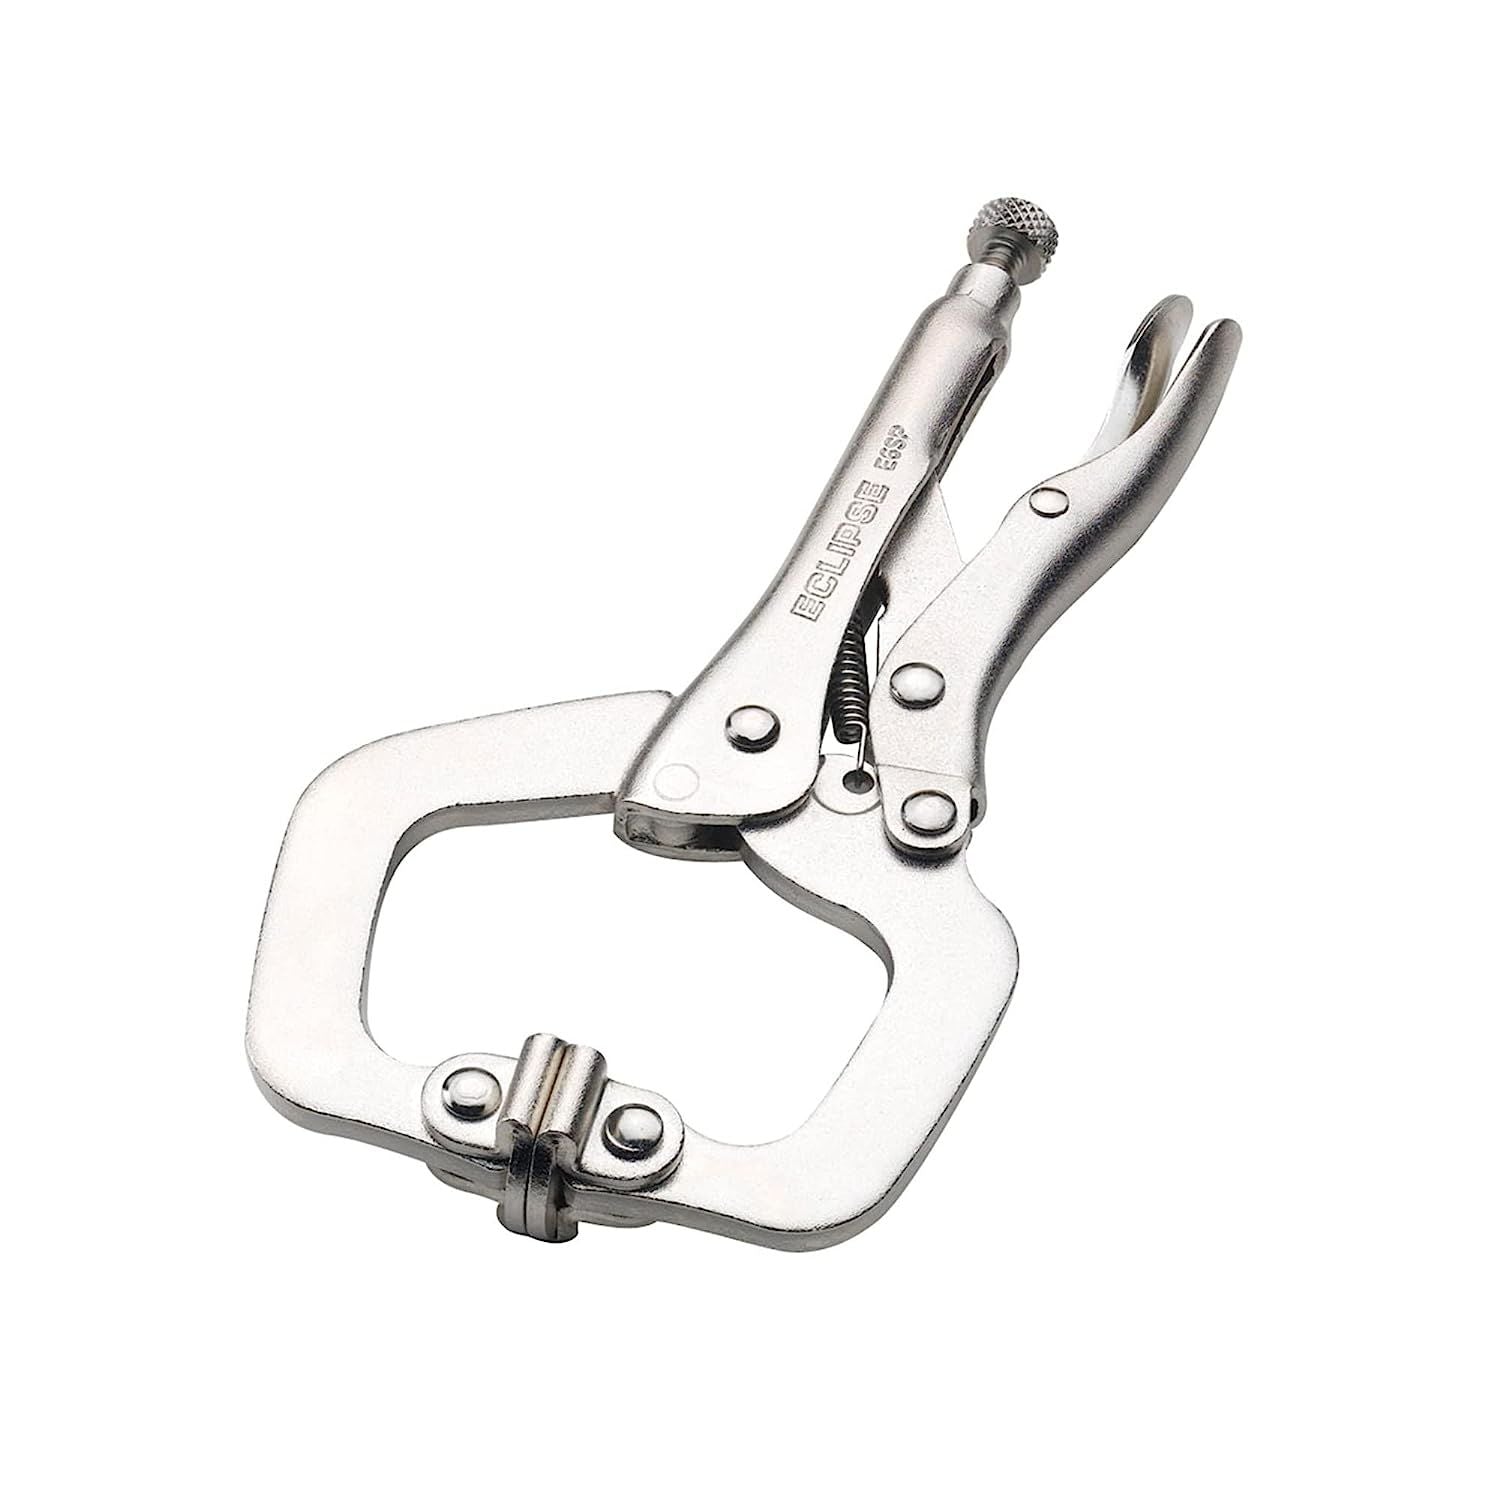 Locking Pliers with Swivel Pads, Chrome Molybdenum Steel, 6-Inch Size, 1-3/4-Inch Jaw Capacity